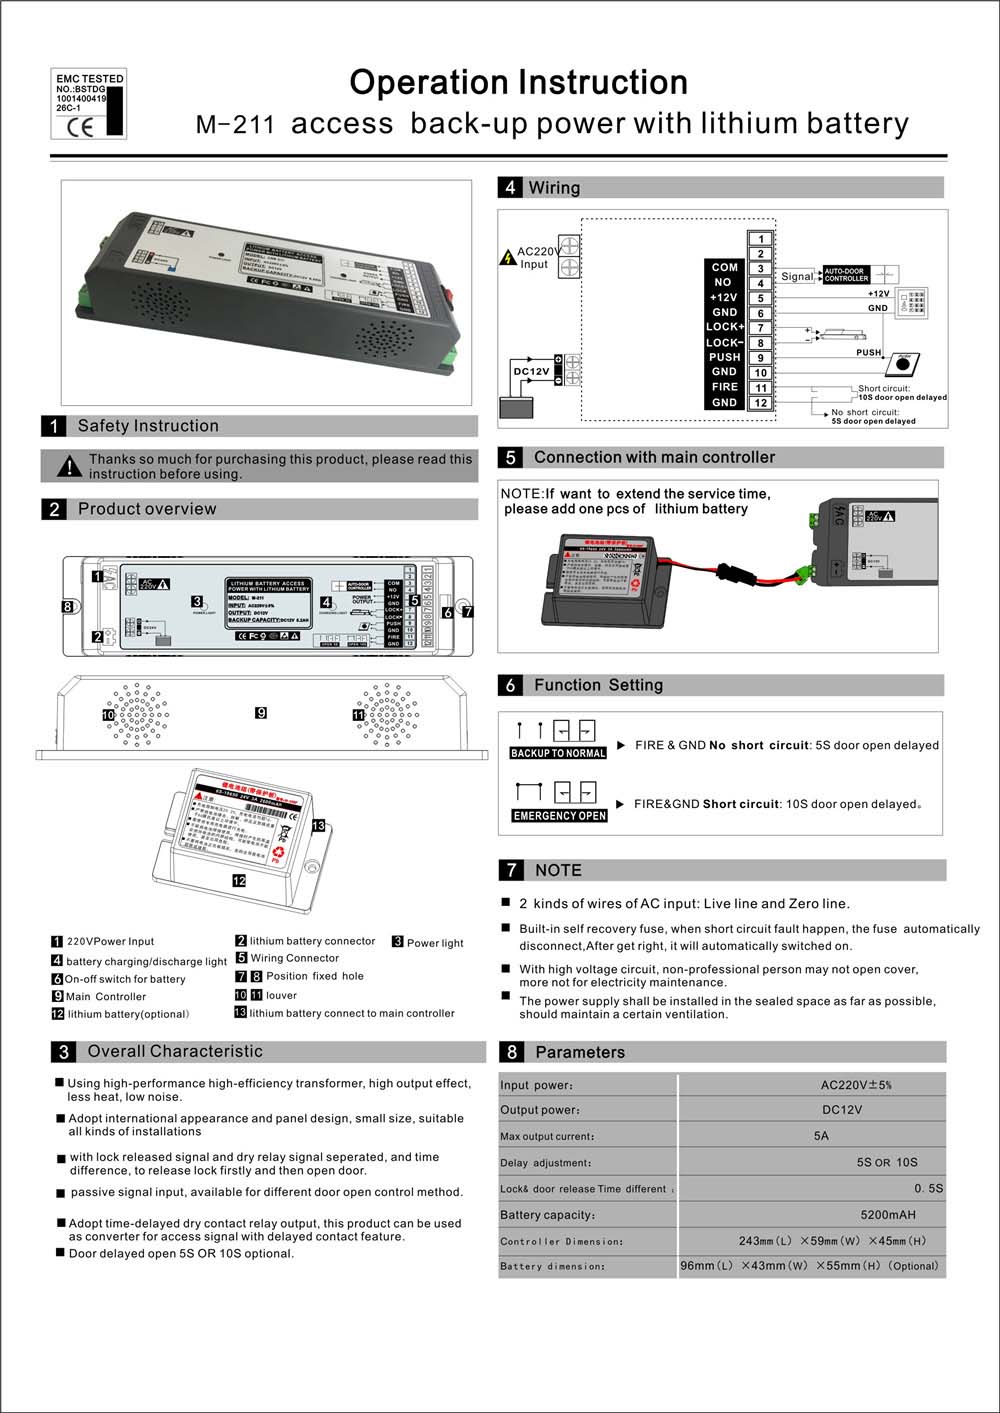 M-211 Access Backup Power with Lithium Battery